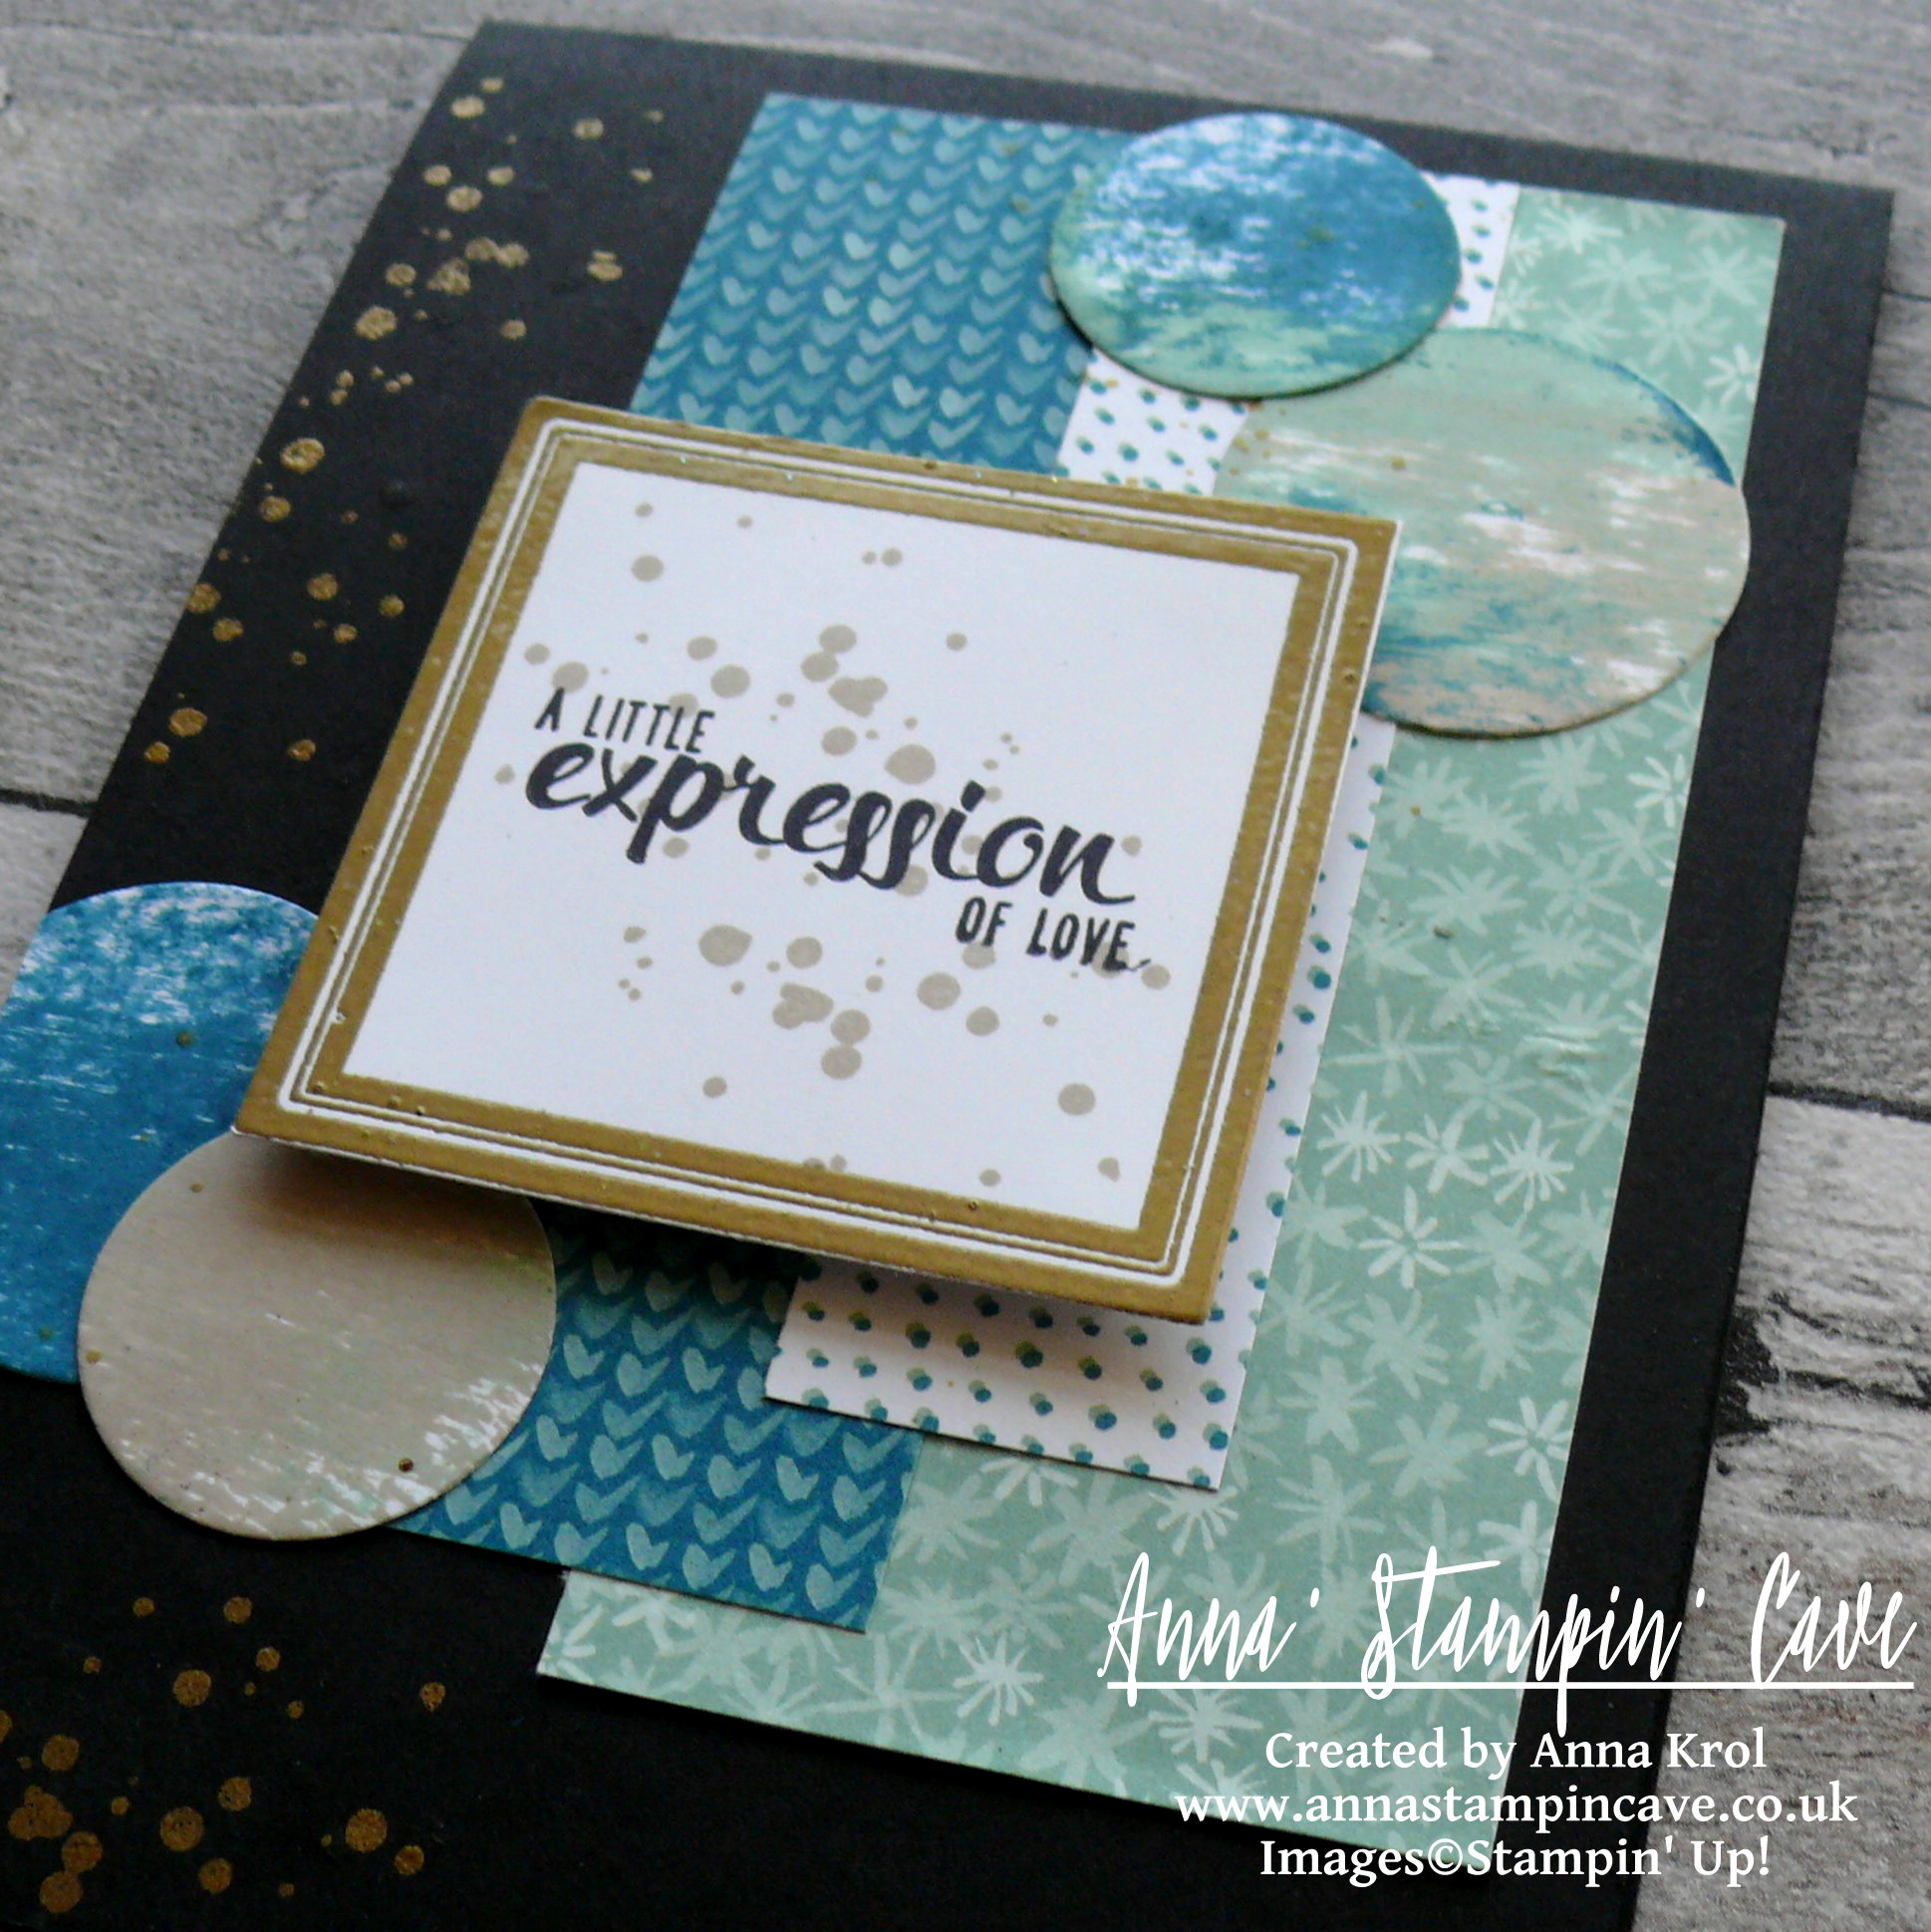 Anna' Stampin' Cave - Stampin' Up! Painter's Palette - A Little Expression Of Love Card